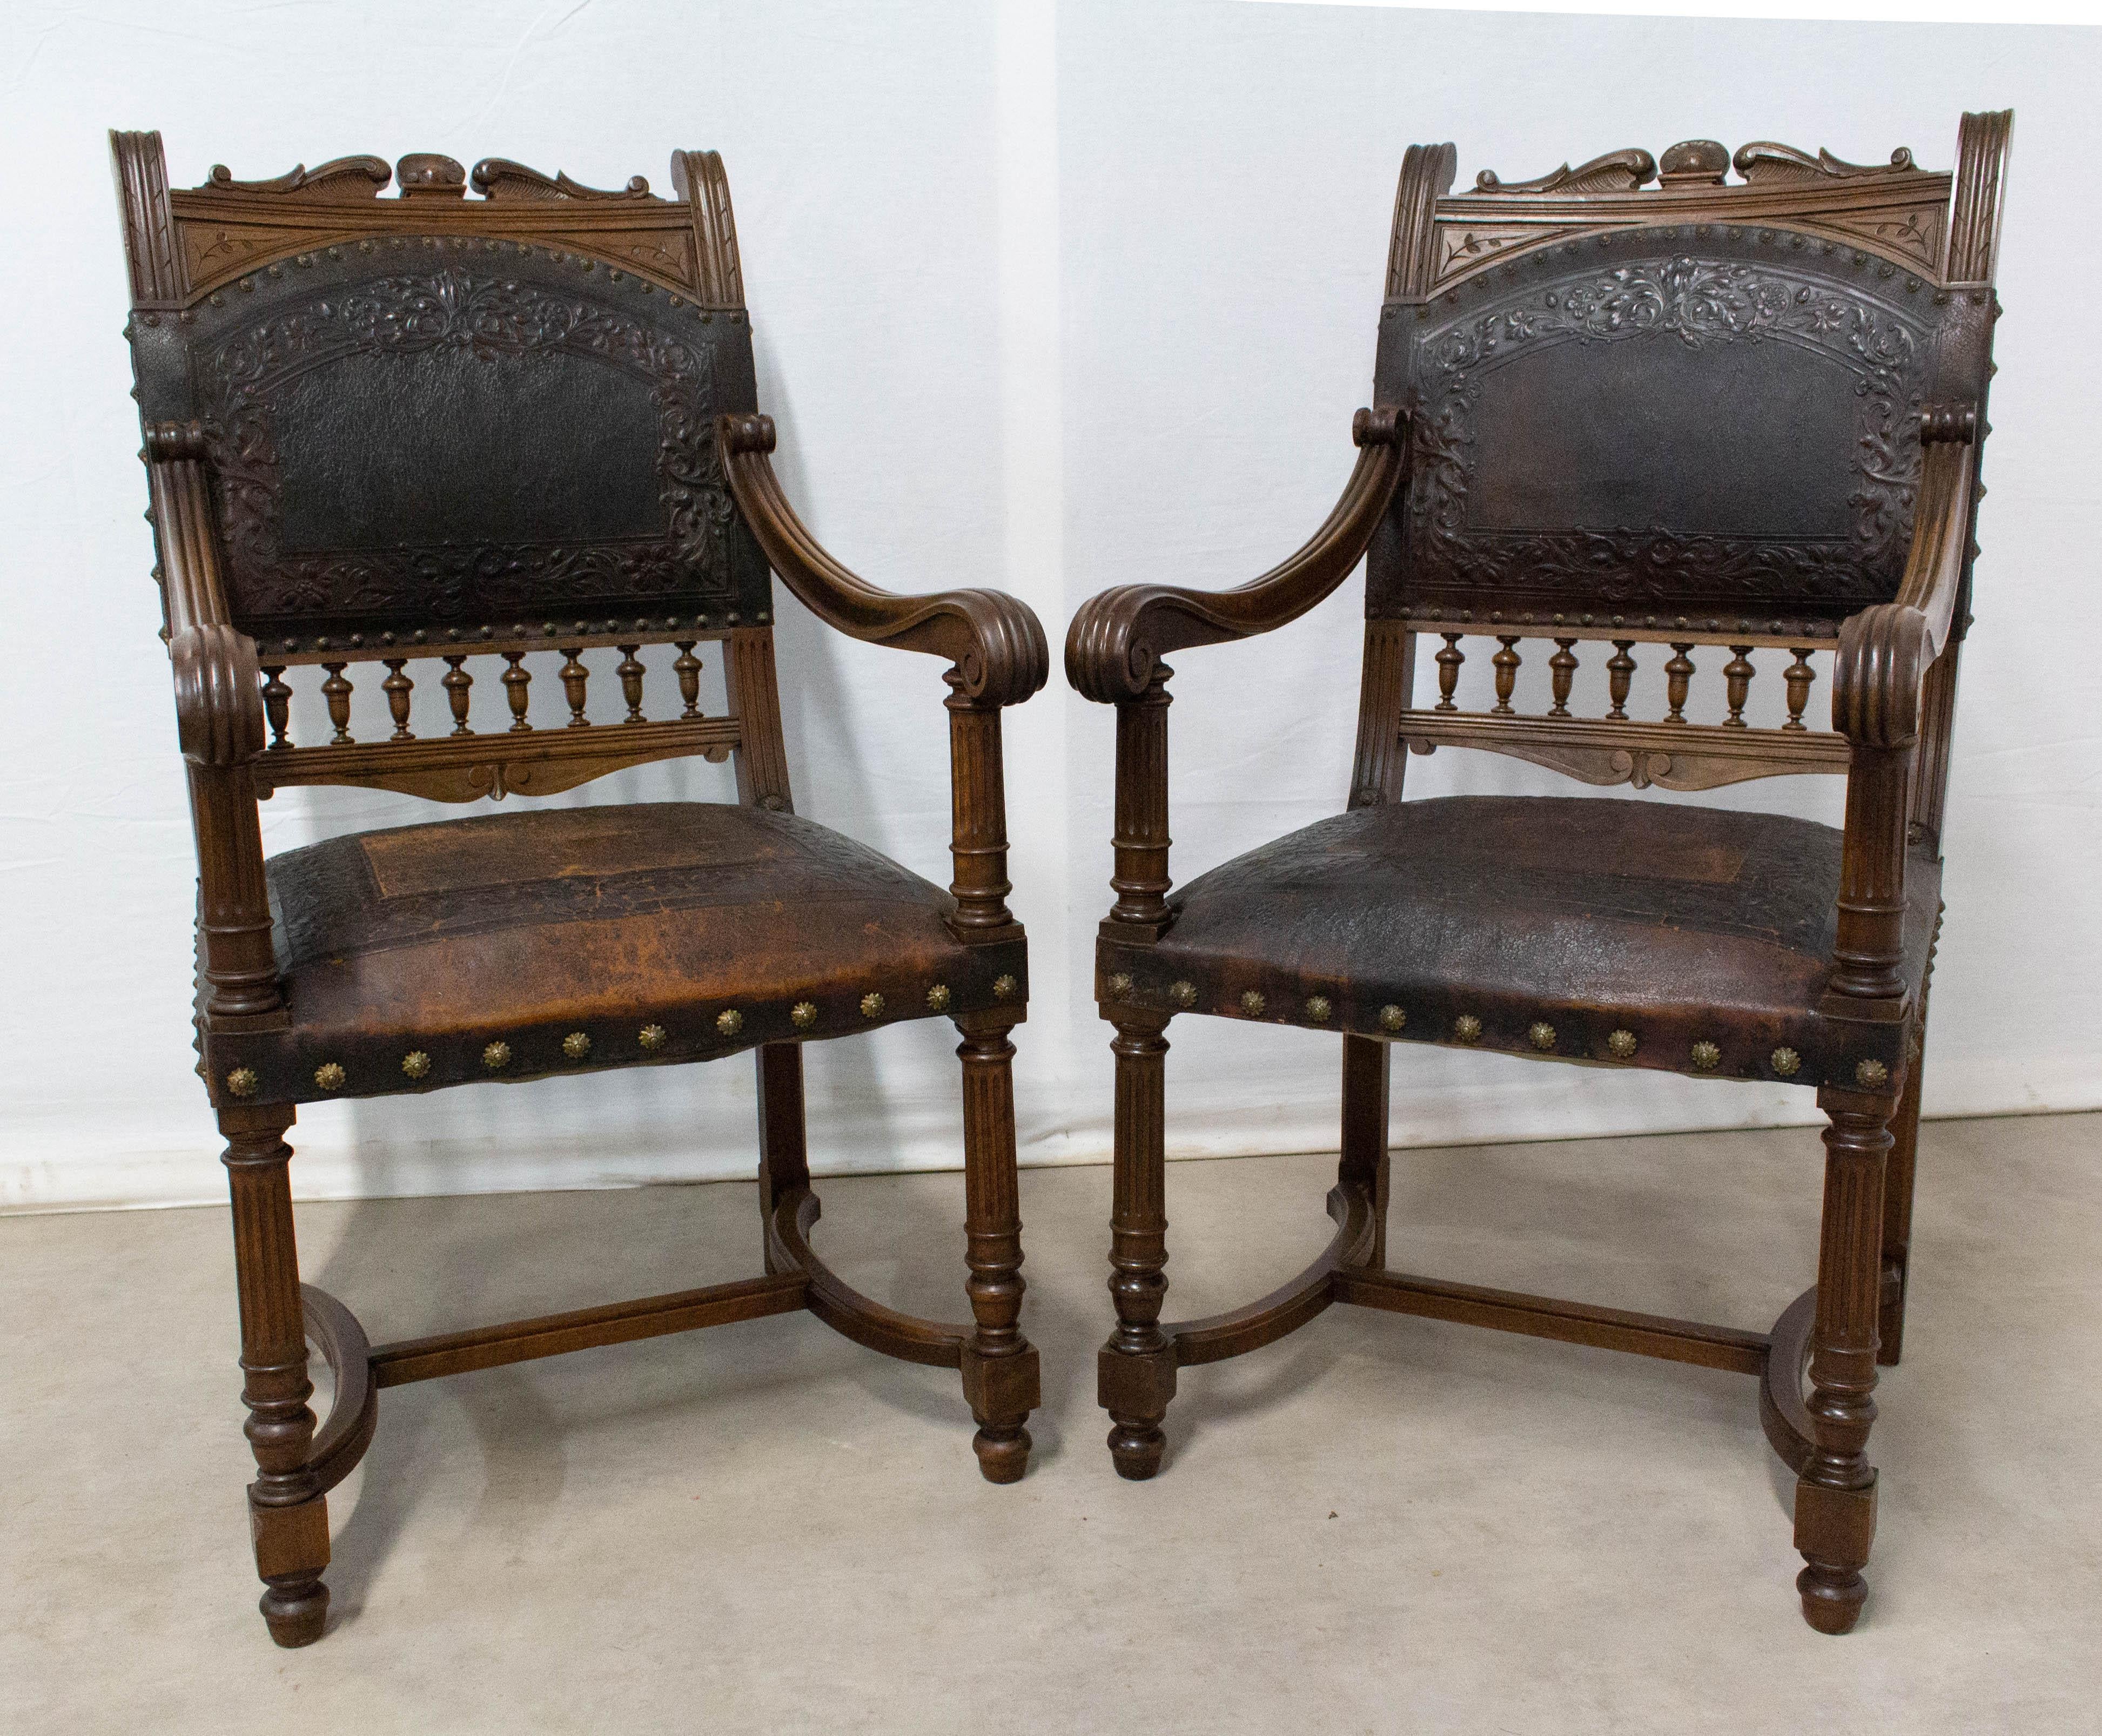 Late 19th century antique pair of armchairs in the Louis XIII or Henri II style
Walnut and embossed leather
Good condition, solid and sound.

For shipping:
2 packs: W 57, P 72, H 107 cm 12.4kg each one.